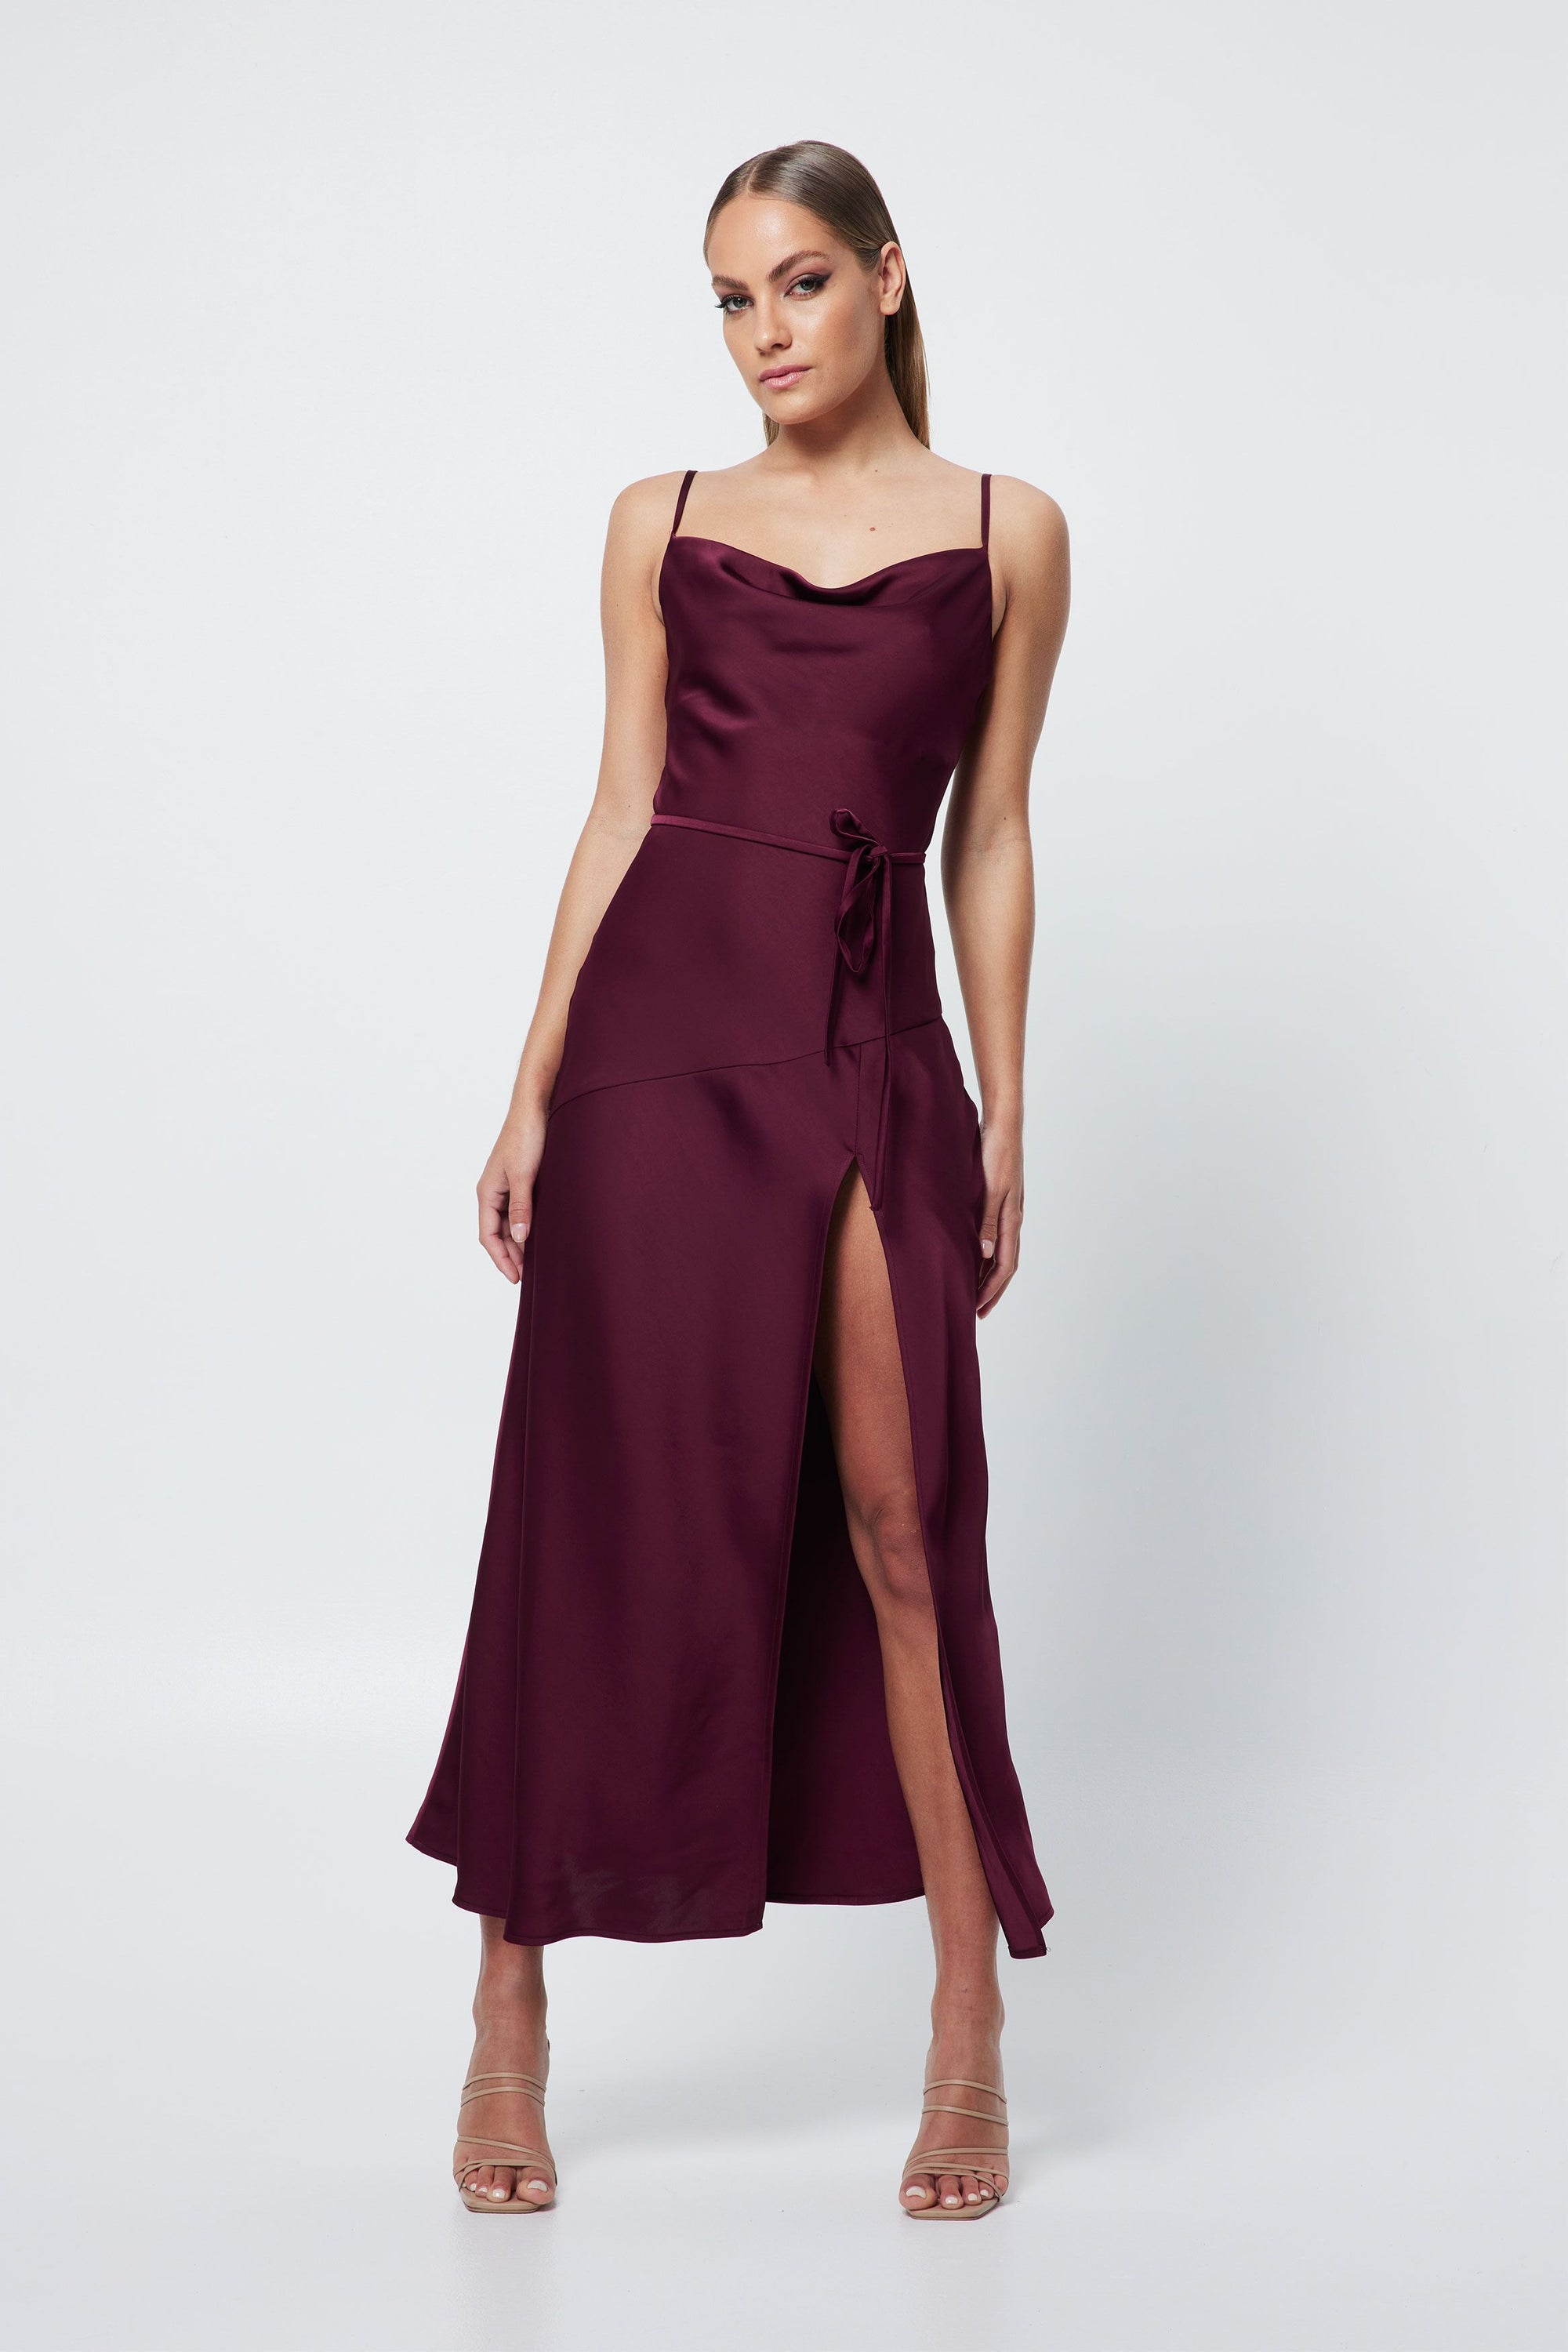 The Stand By You Dress - Burgundy